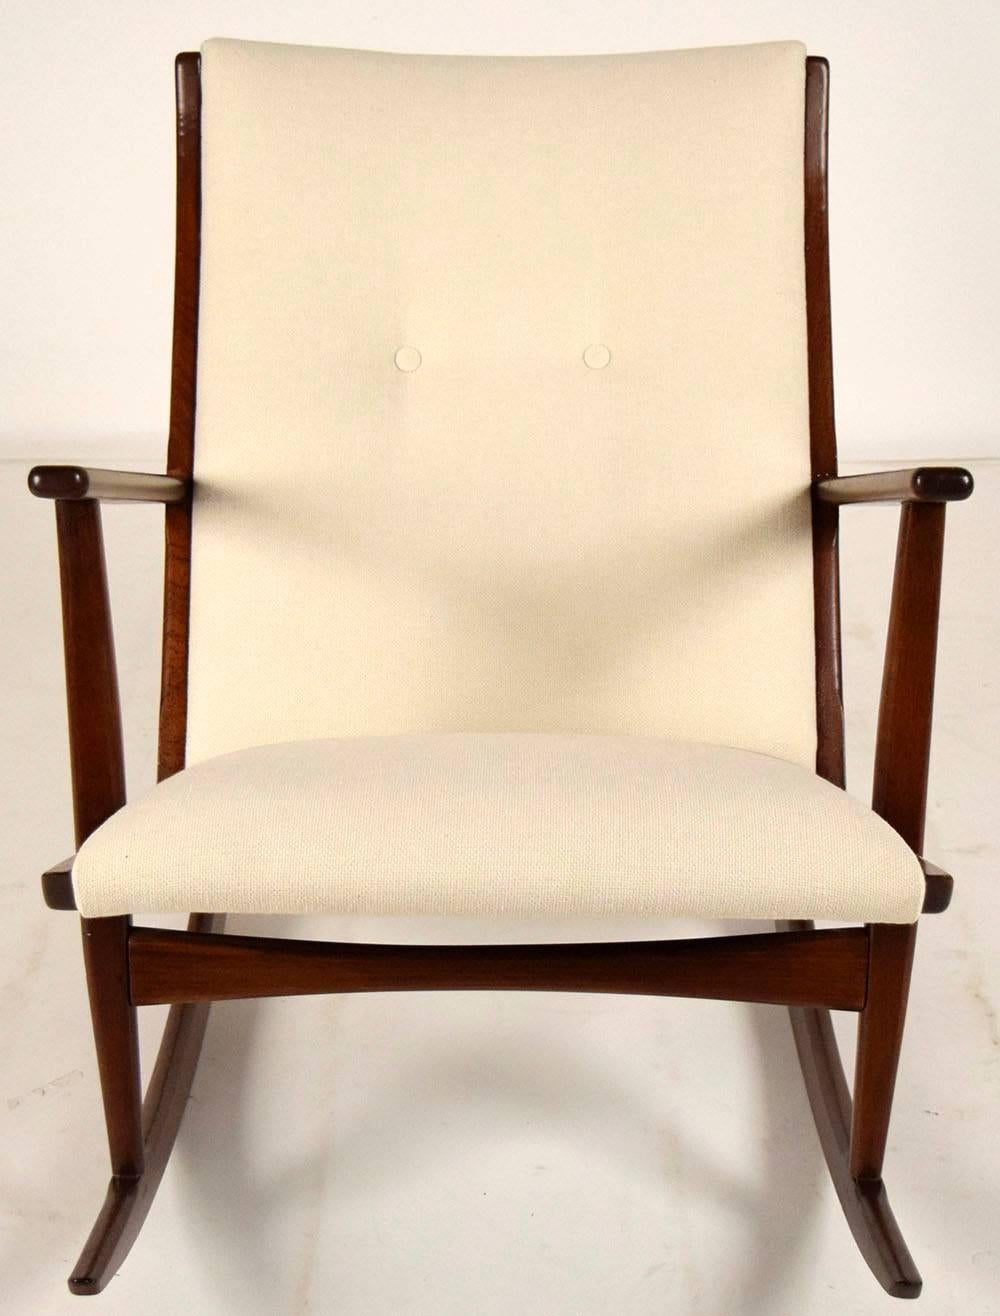 Boomerang rocking chair 1960s by Soren Georg Jensen for Kubus. Beautiful teak wood frame, finished in a dark walnut color. Chair has been professionally upholstered in an ivory color fabric with two center buttons on the back. Chair is solid and